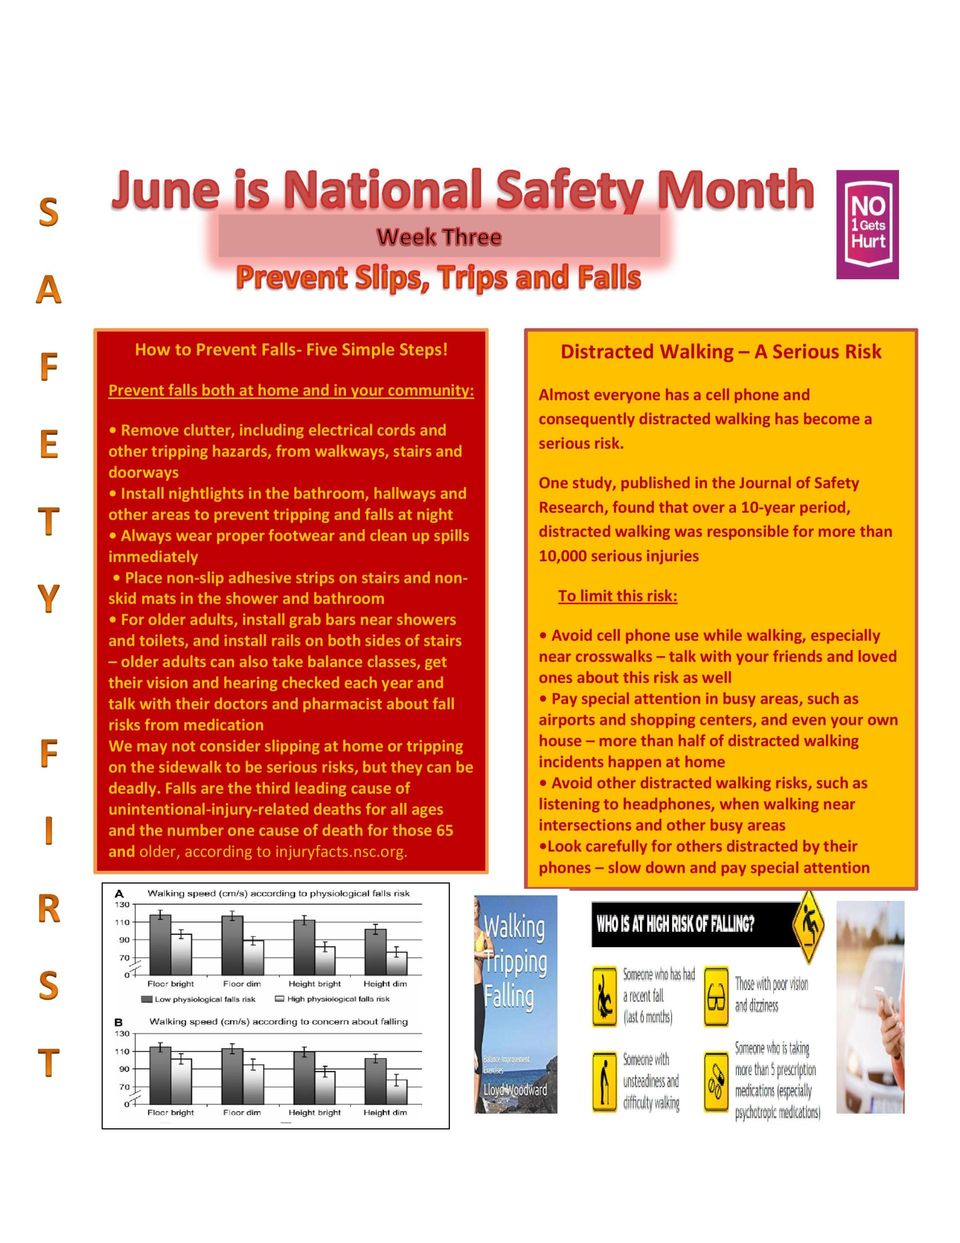 June is National Safety Month: Week Three graphic